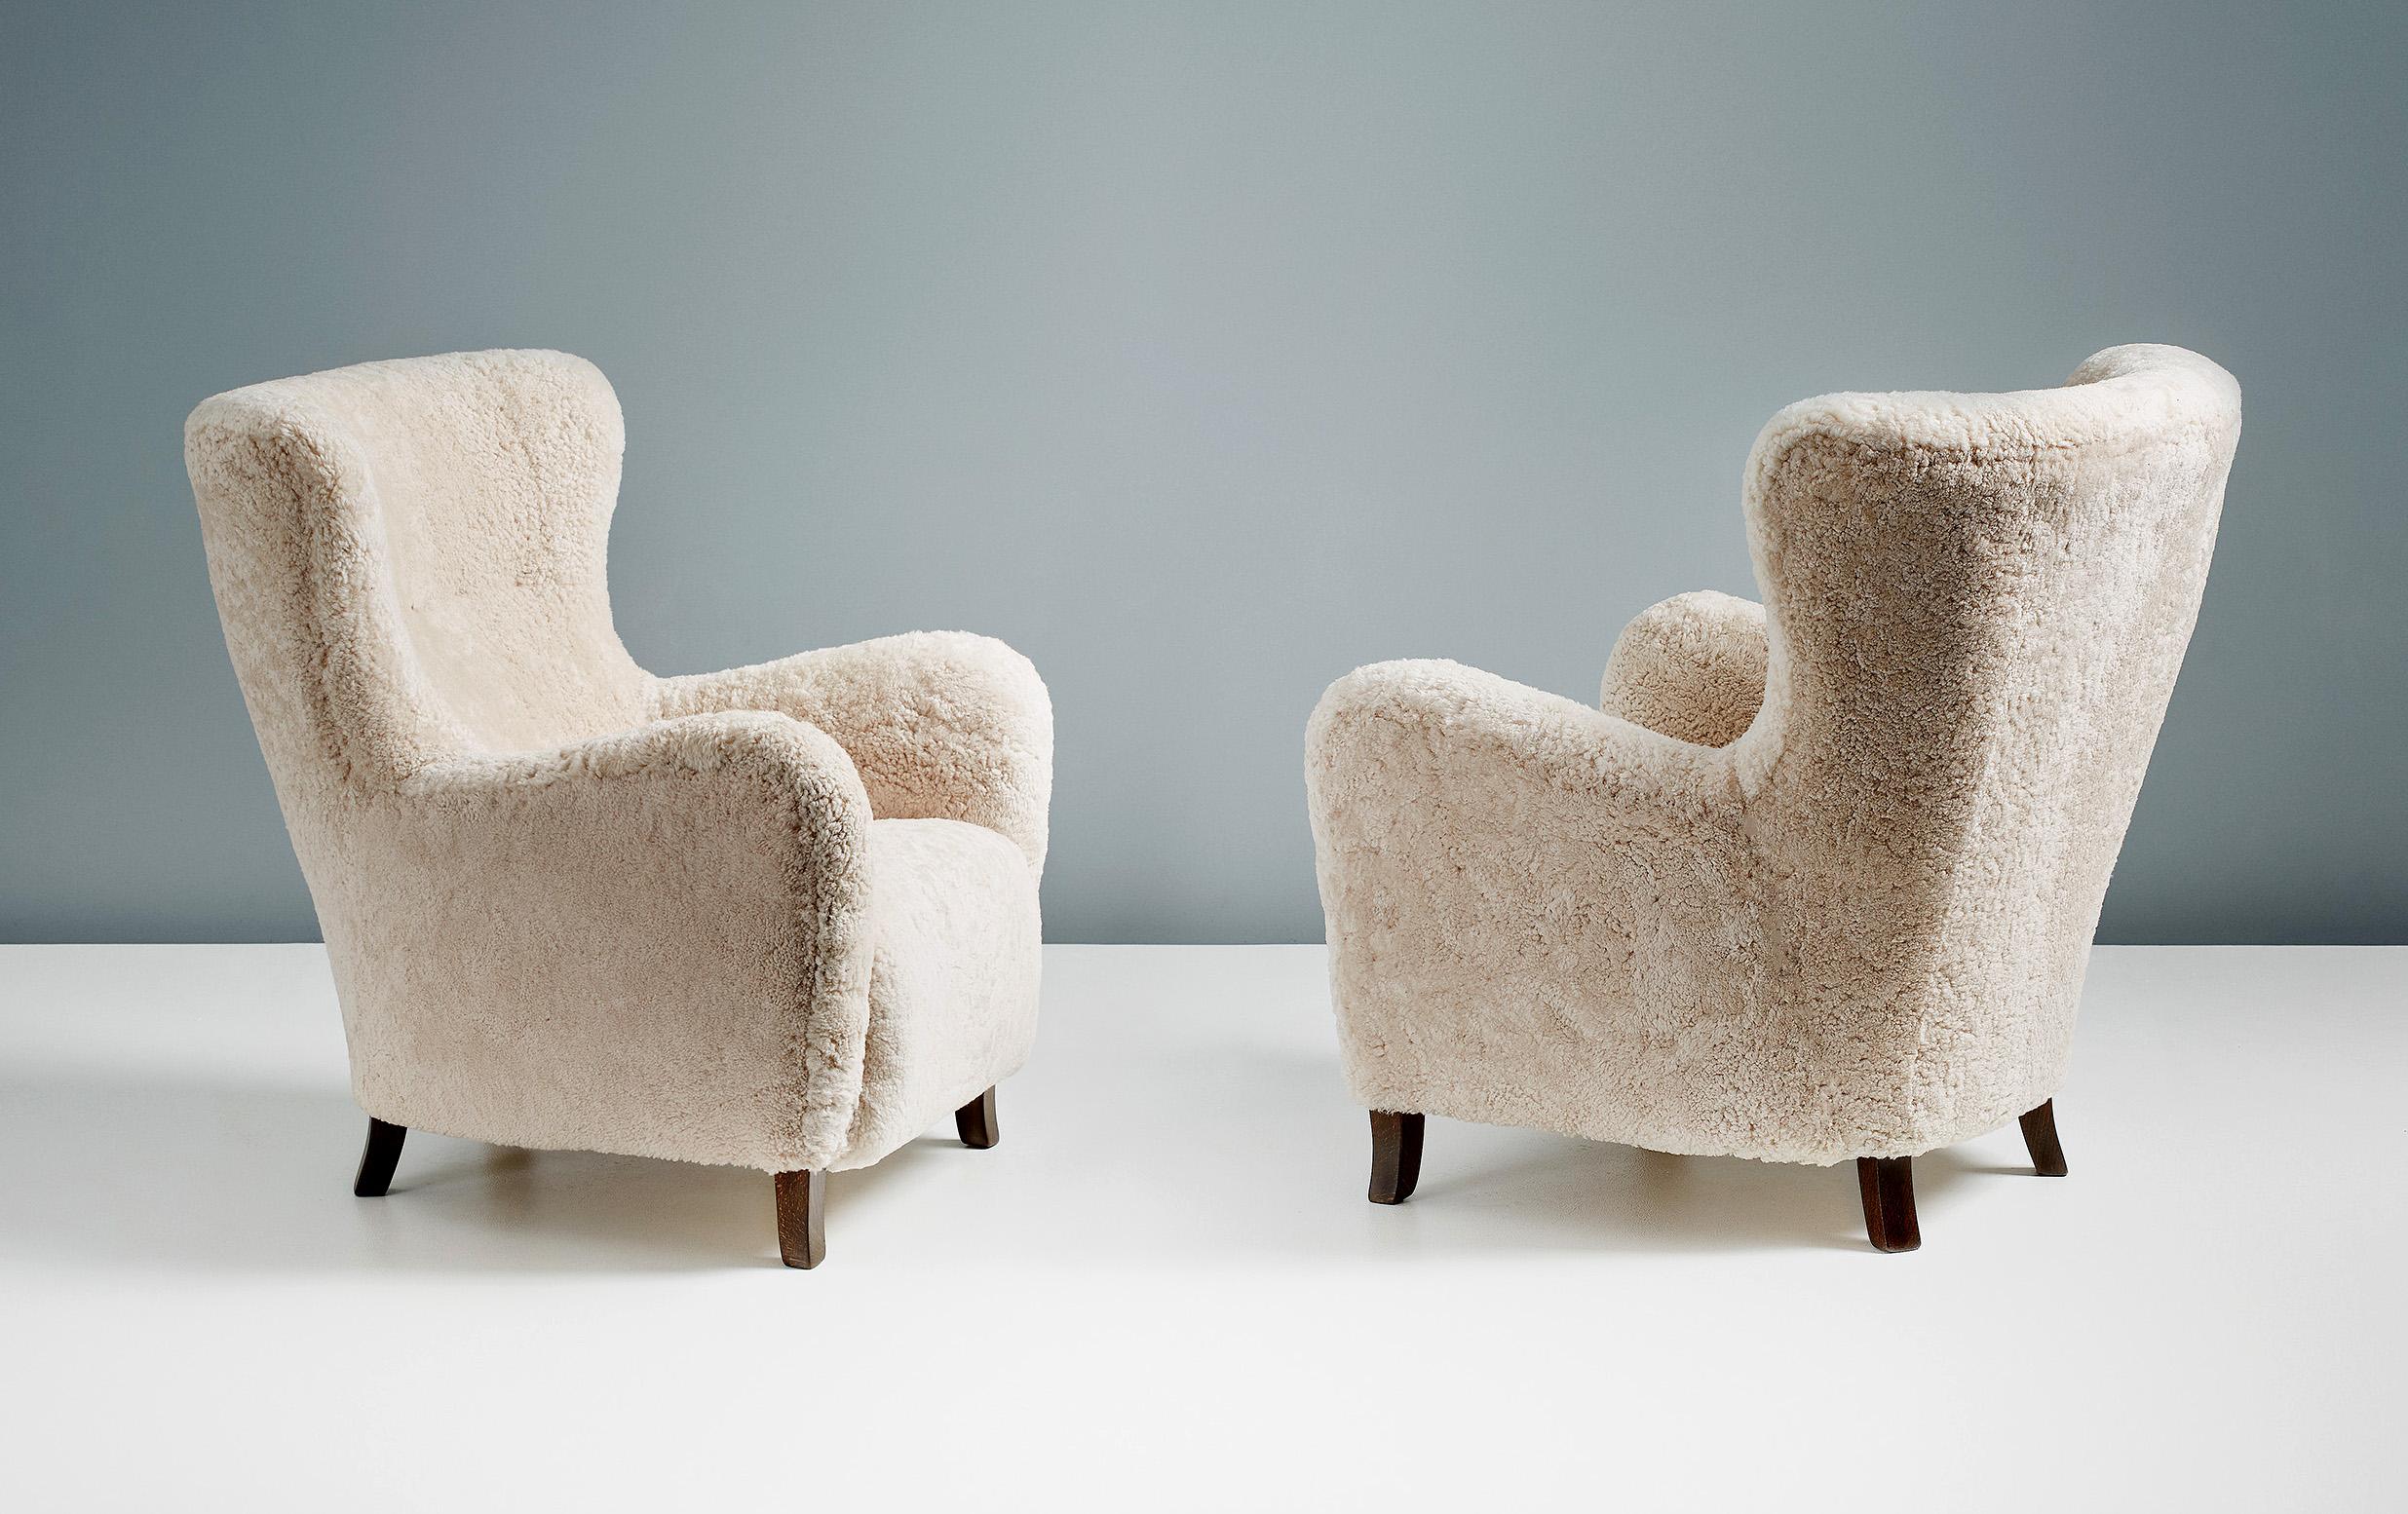 Dagmar Design - Sampo wing chair

The Sampo wing chair is from the Dagmar Design custom-made upholstered range. This piece has been developed and hand-made at our workshops in London using the highest quality materials. The frame is constructed